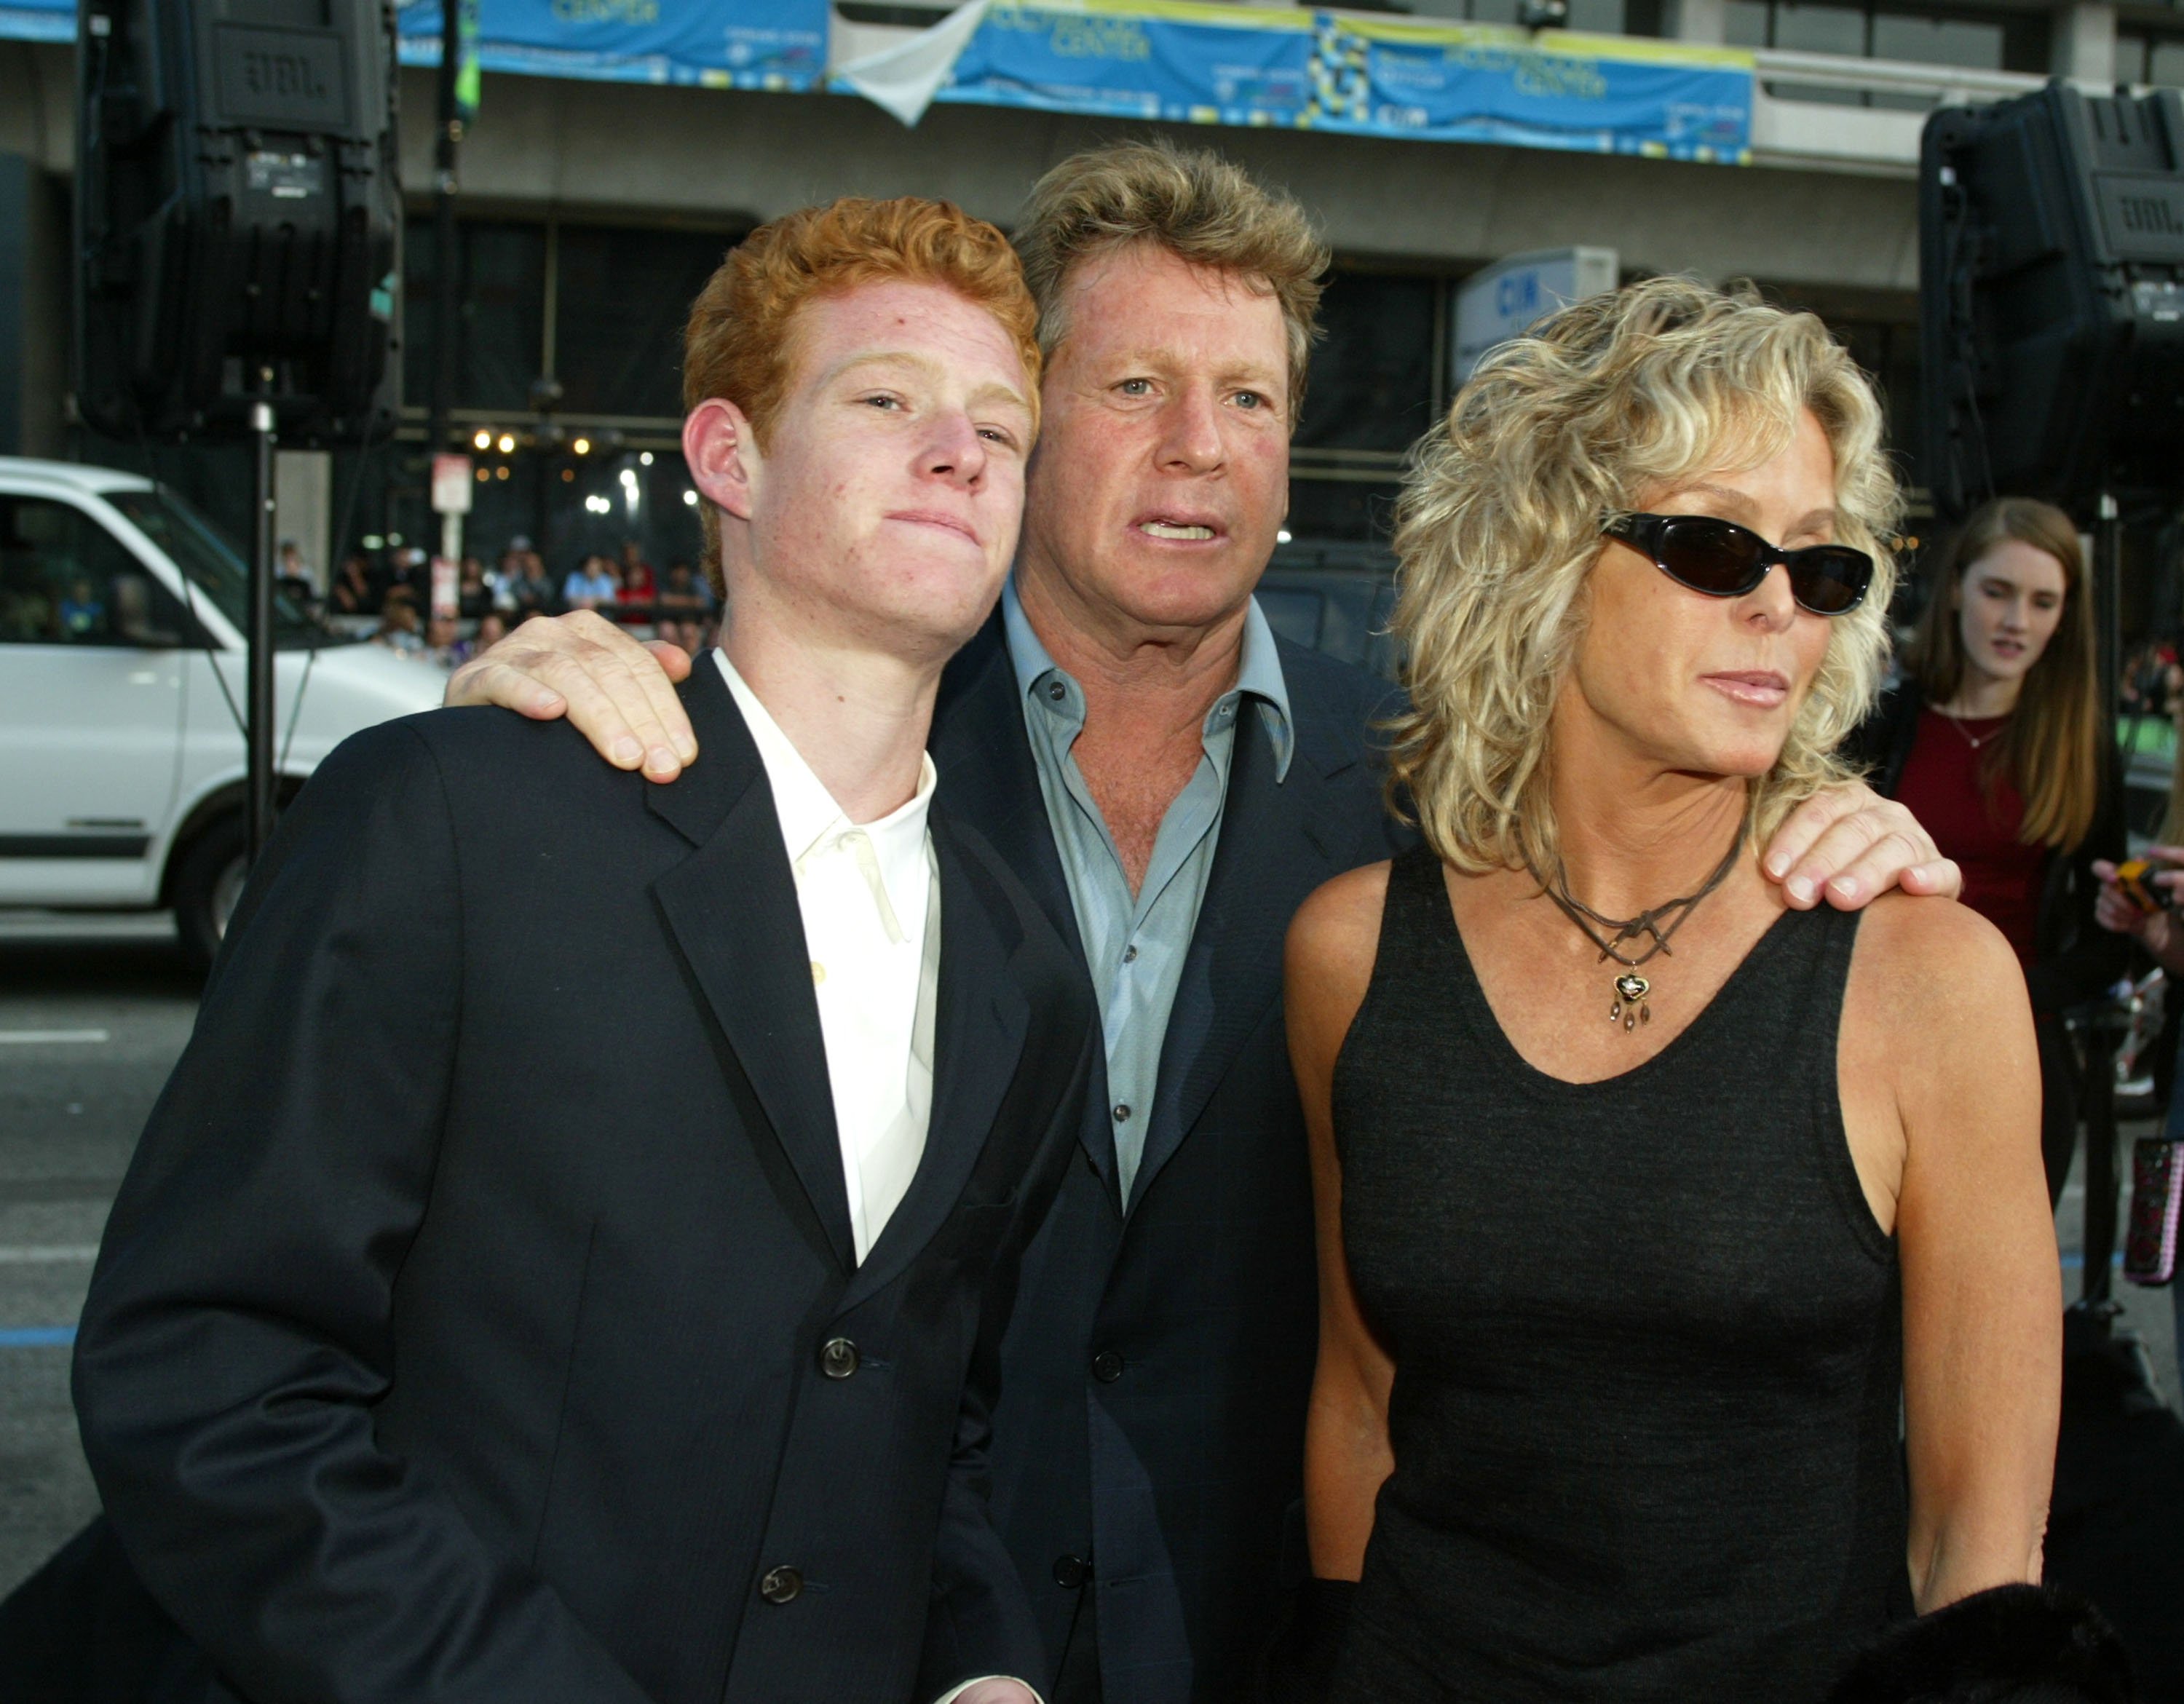 Farah Fawcett with Ryan O'Neal and their son Redmond O'Neal | Photo: Getty Images